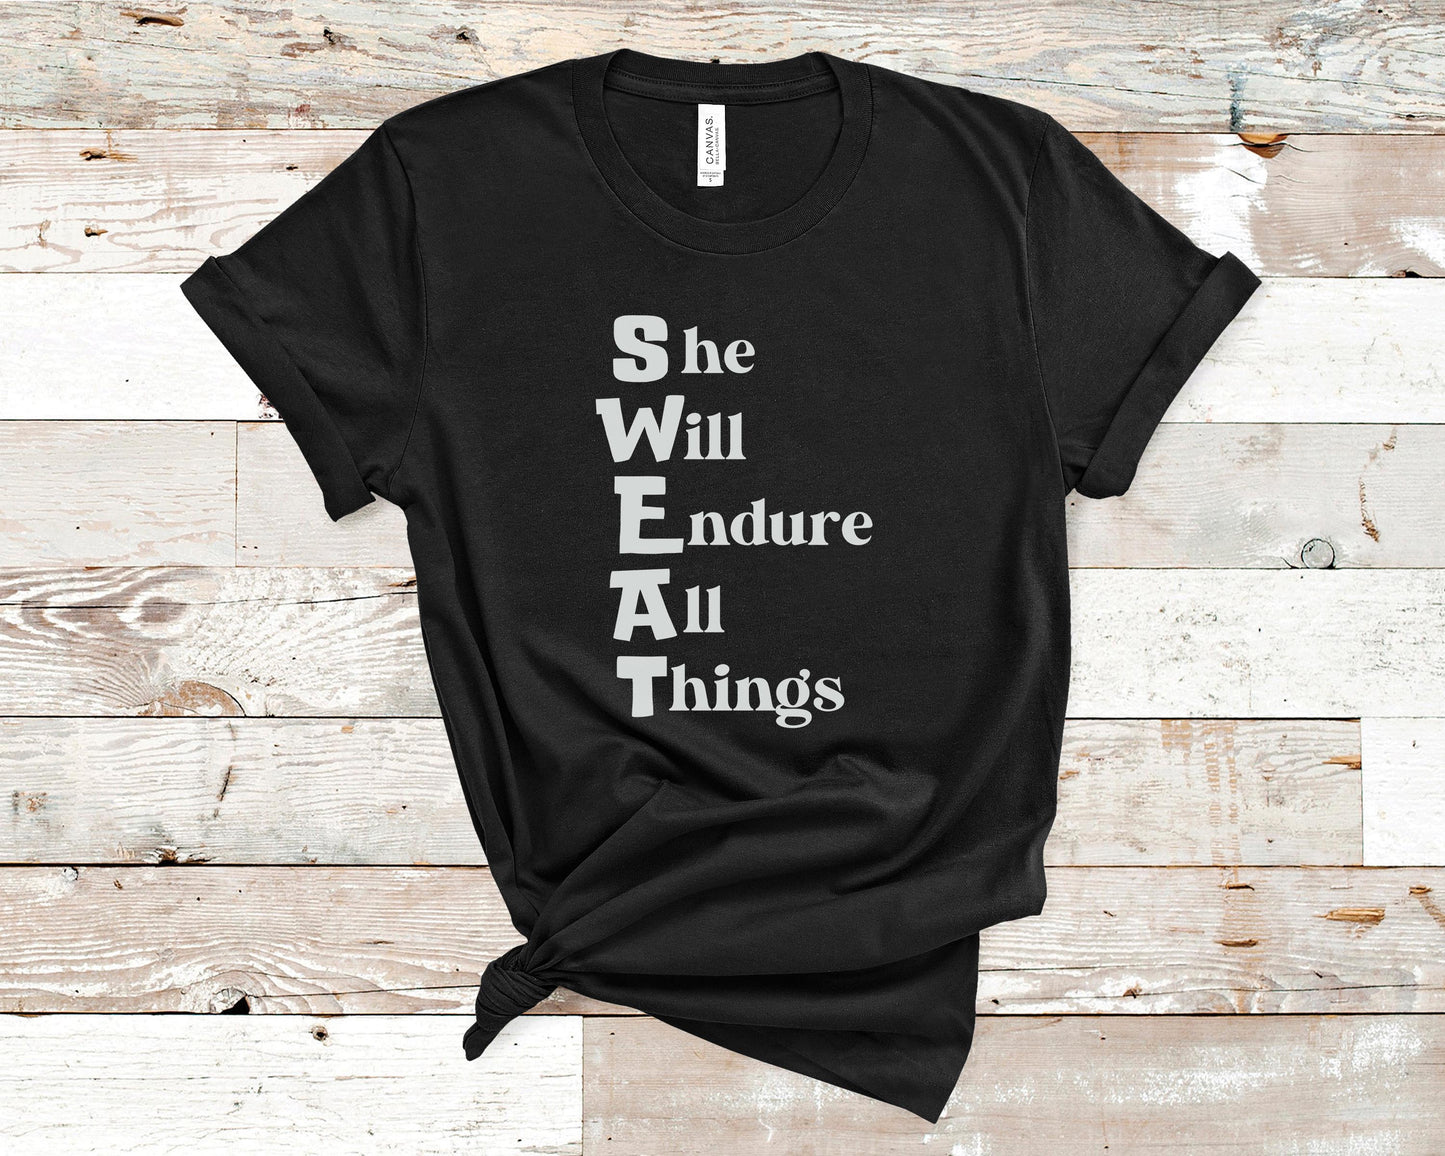 She Will Endure All Things - Fitness Shirt